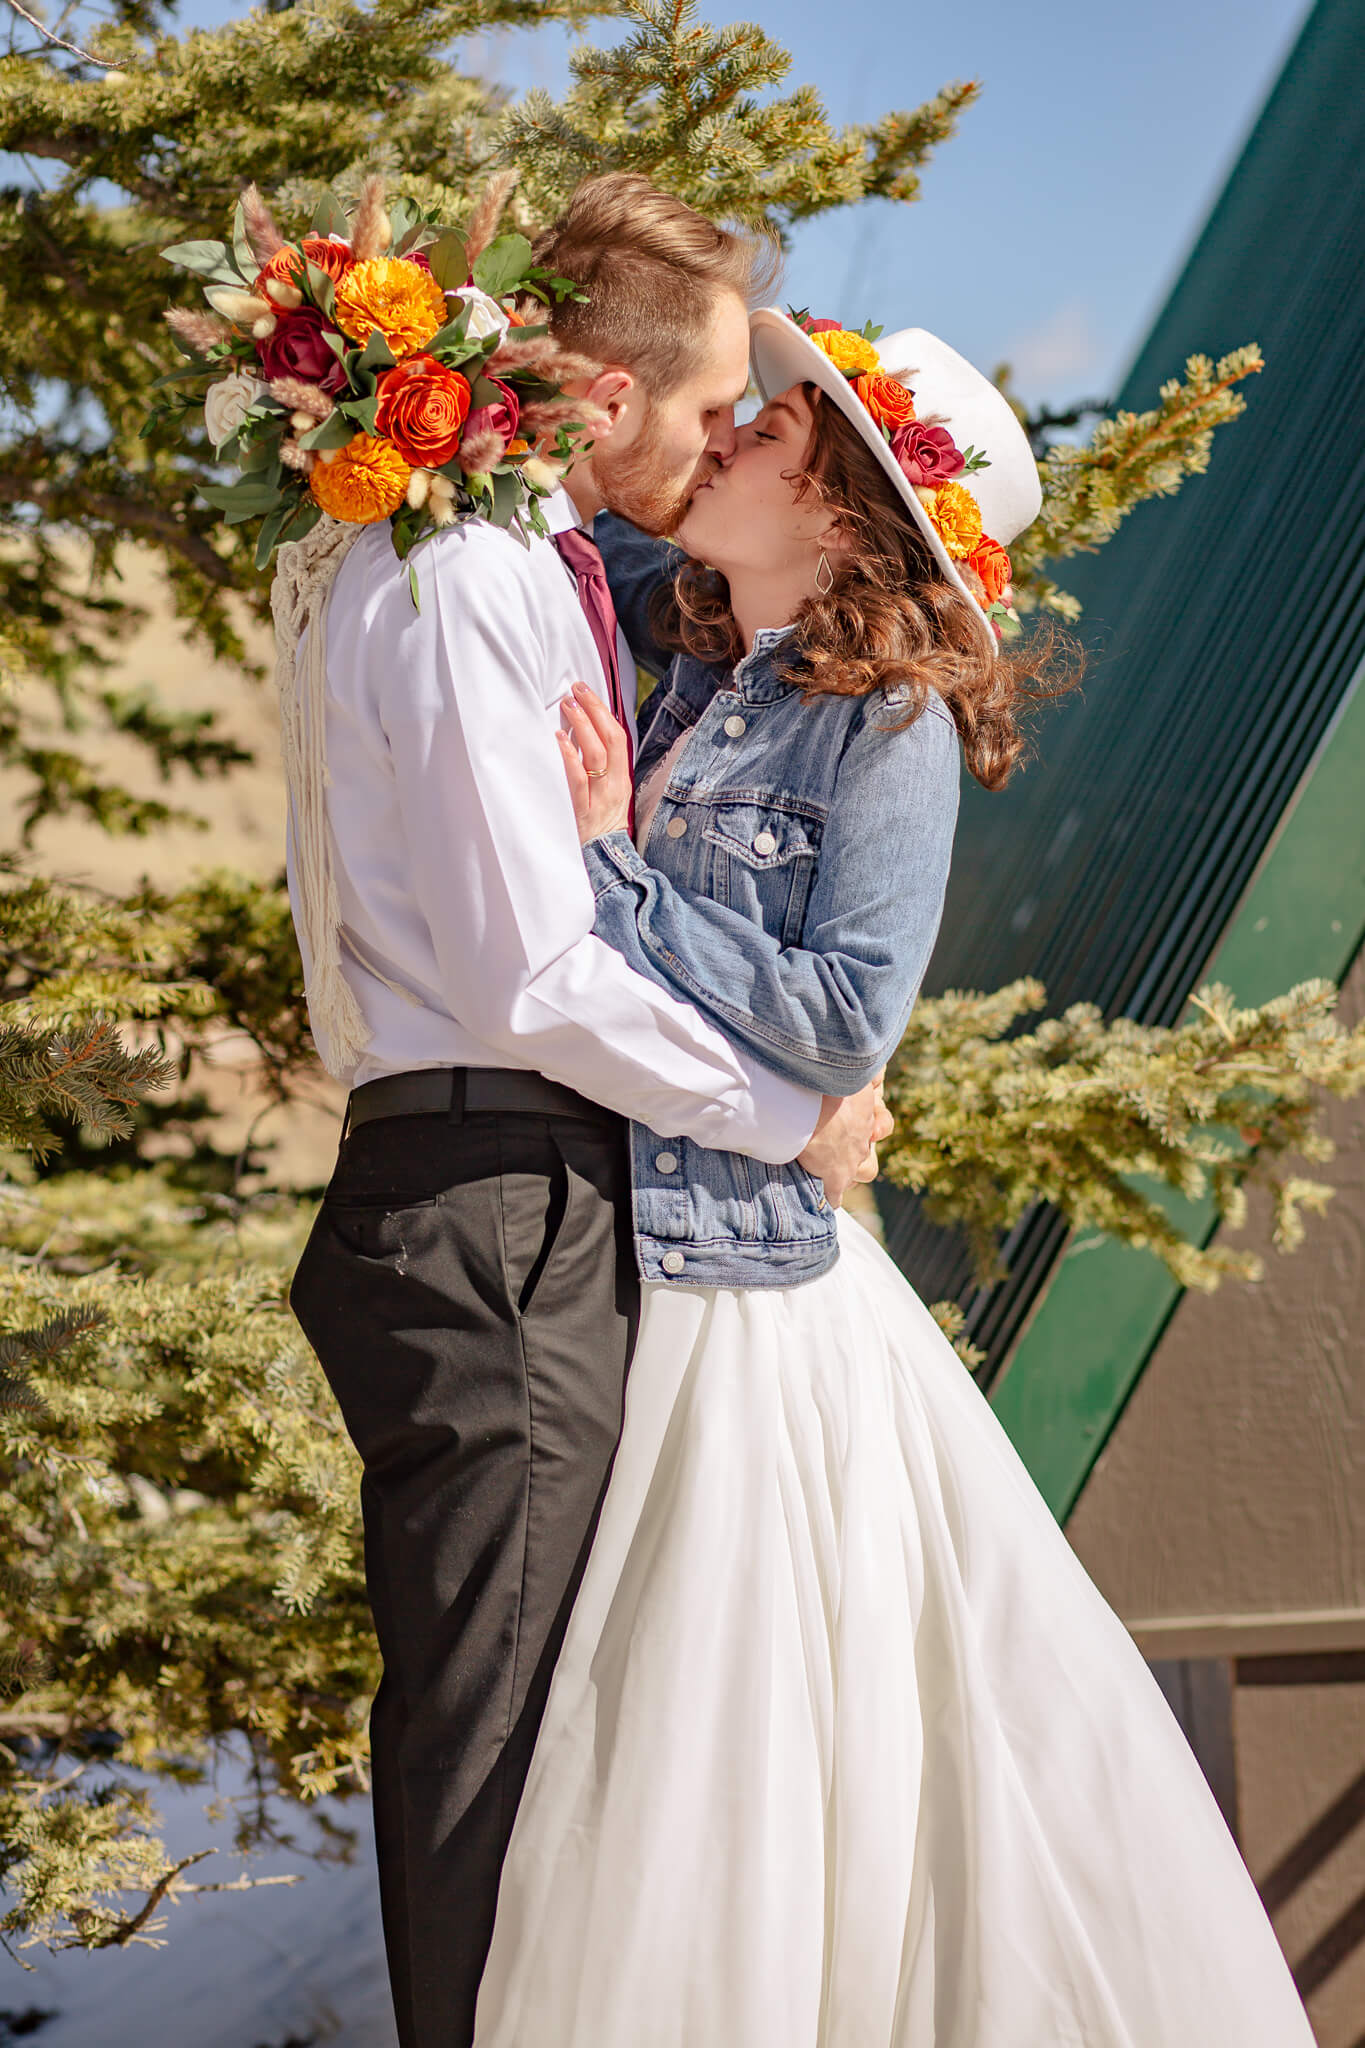 Bride and groom kissing outside cozy cabin.